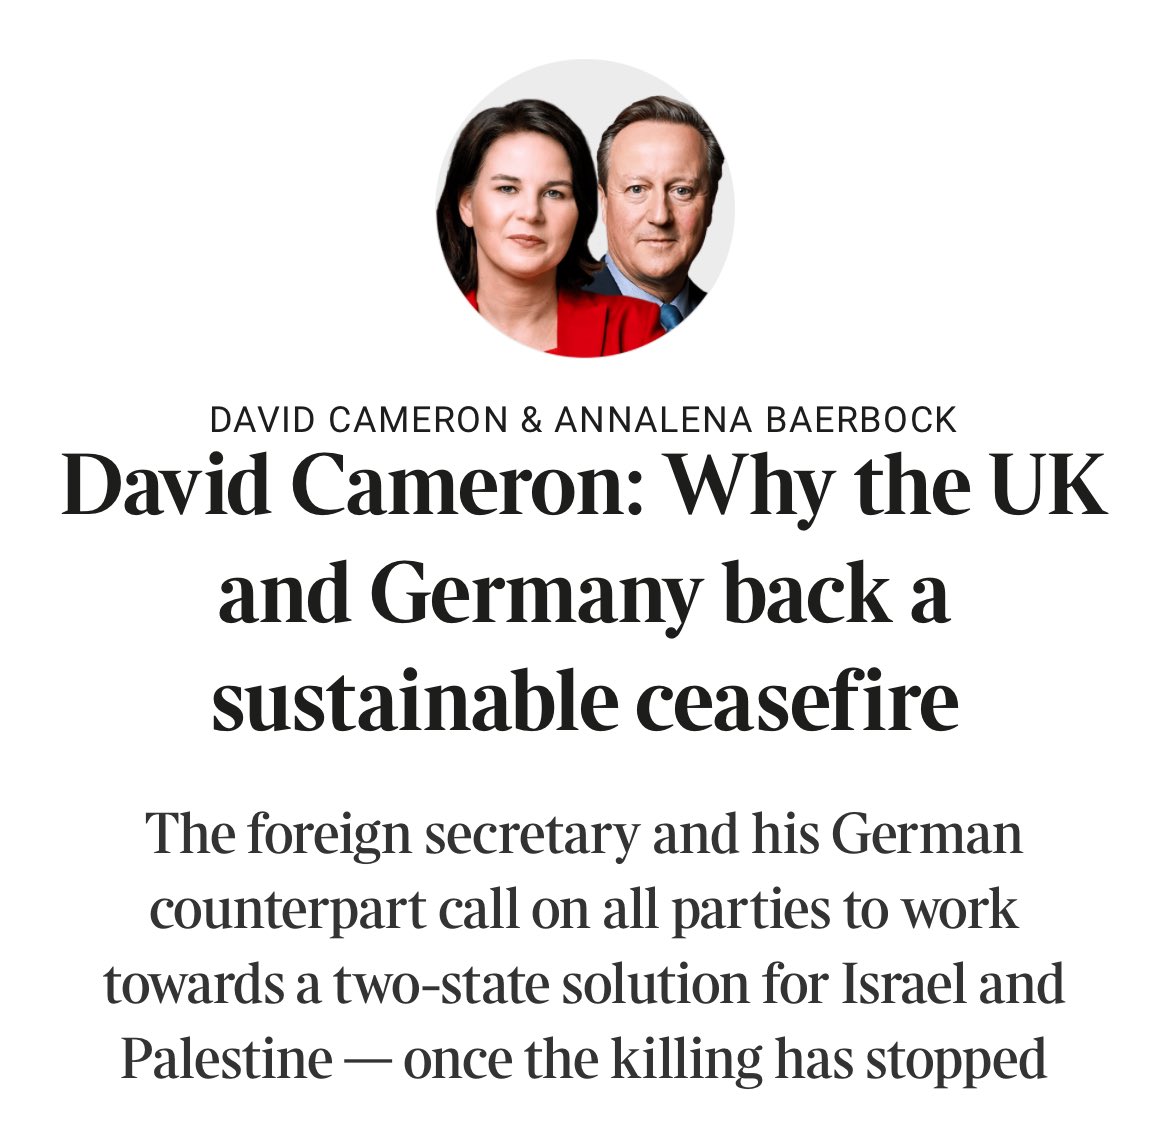 Read the Cameron-Baerbock column 3 times and still can’t work out what they want to happen next. They say a ceasefire is needed as soon as possible, but not immediately because Hamas can’t stay in Gaza and that the ceasefire has to be “sustainable”. So what should be done now?